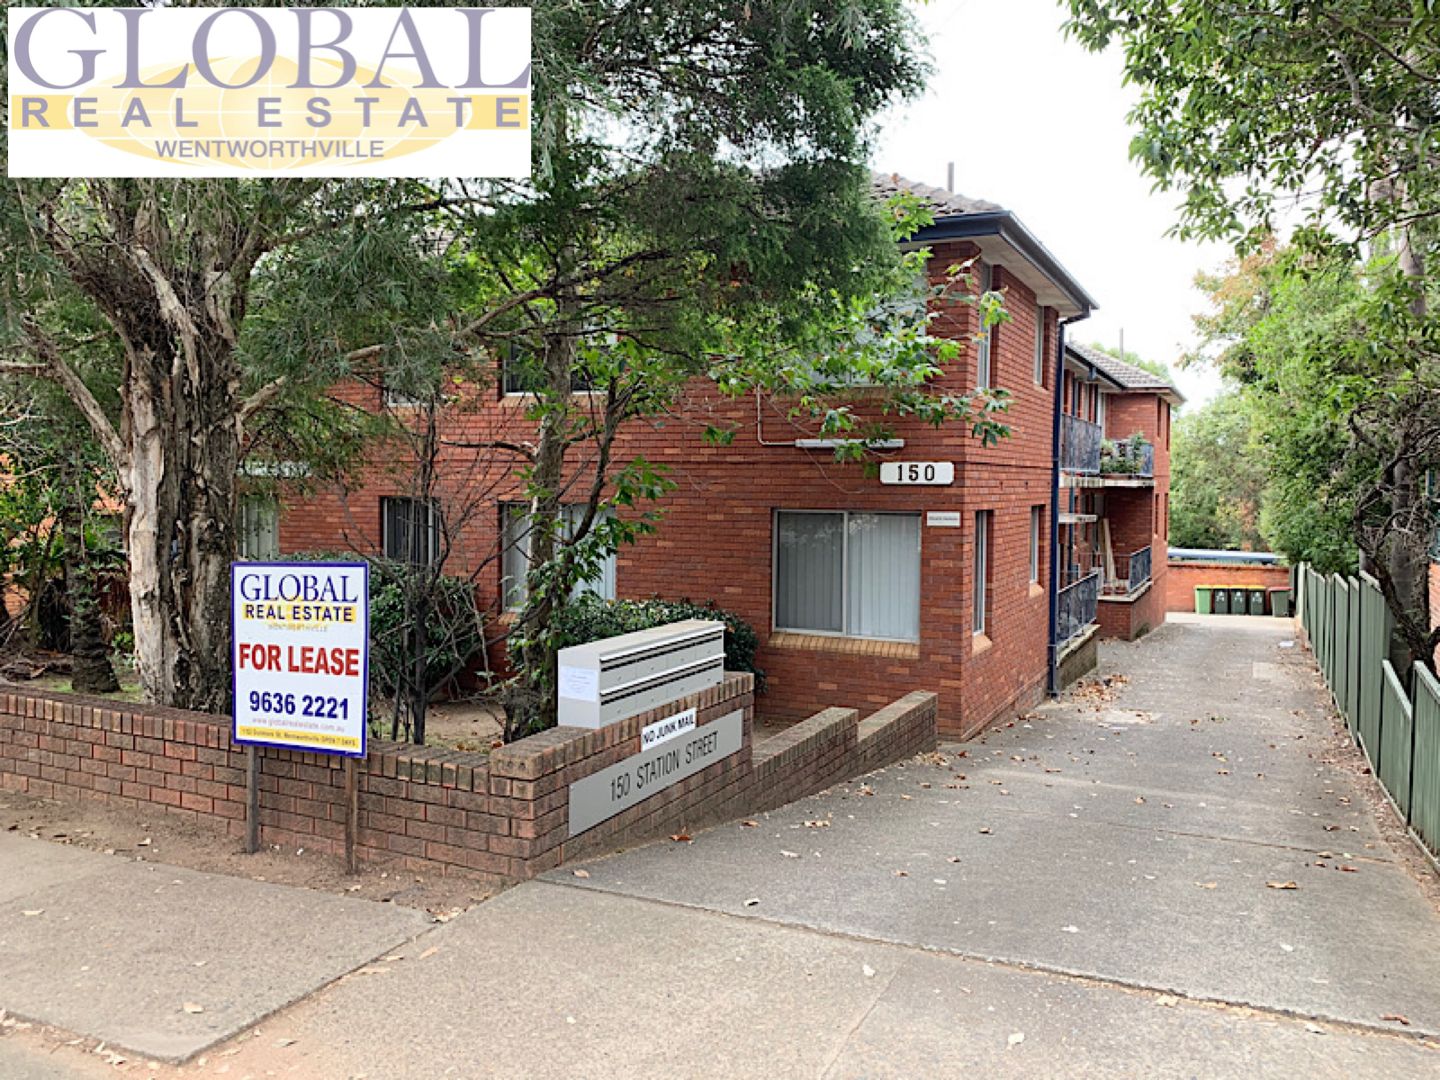 2 bedrooms Apartment / Unit / Flat in 150 Station St WENTWORTHVILLE NSW, 2145